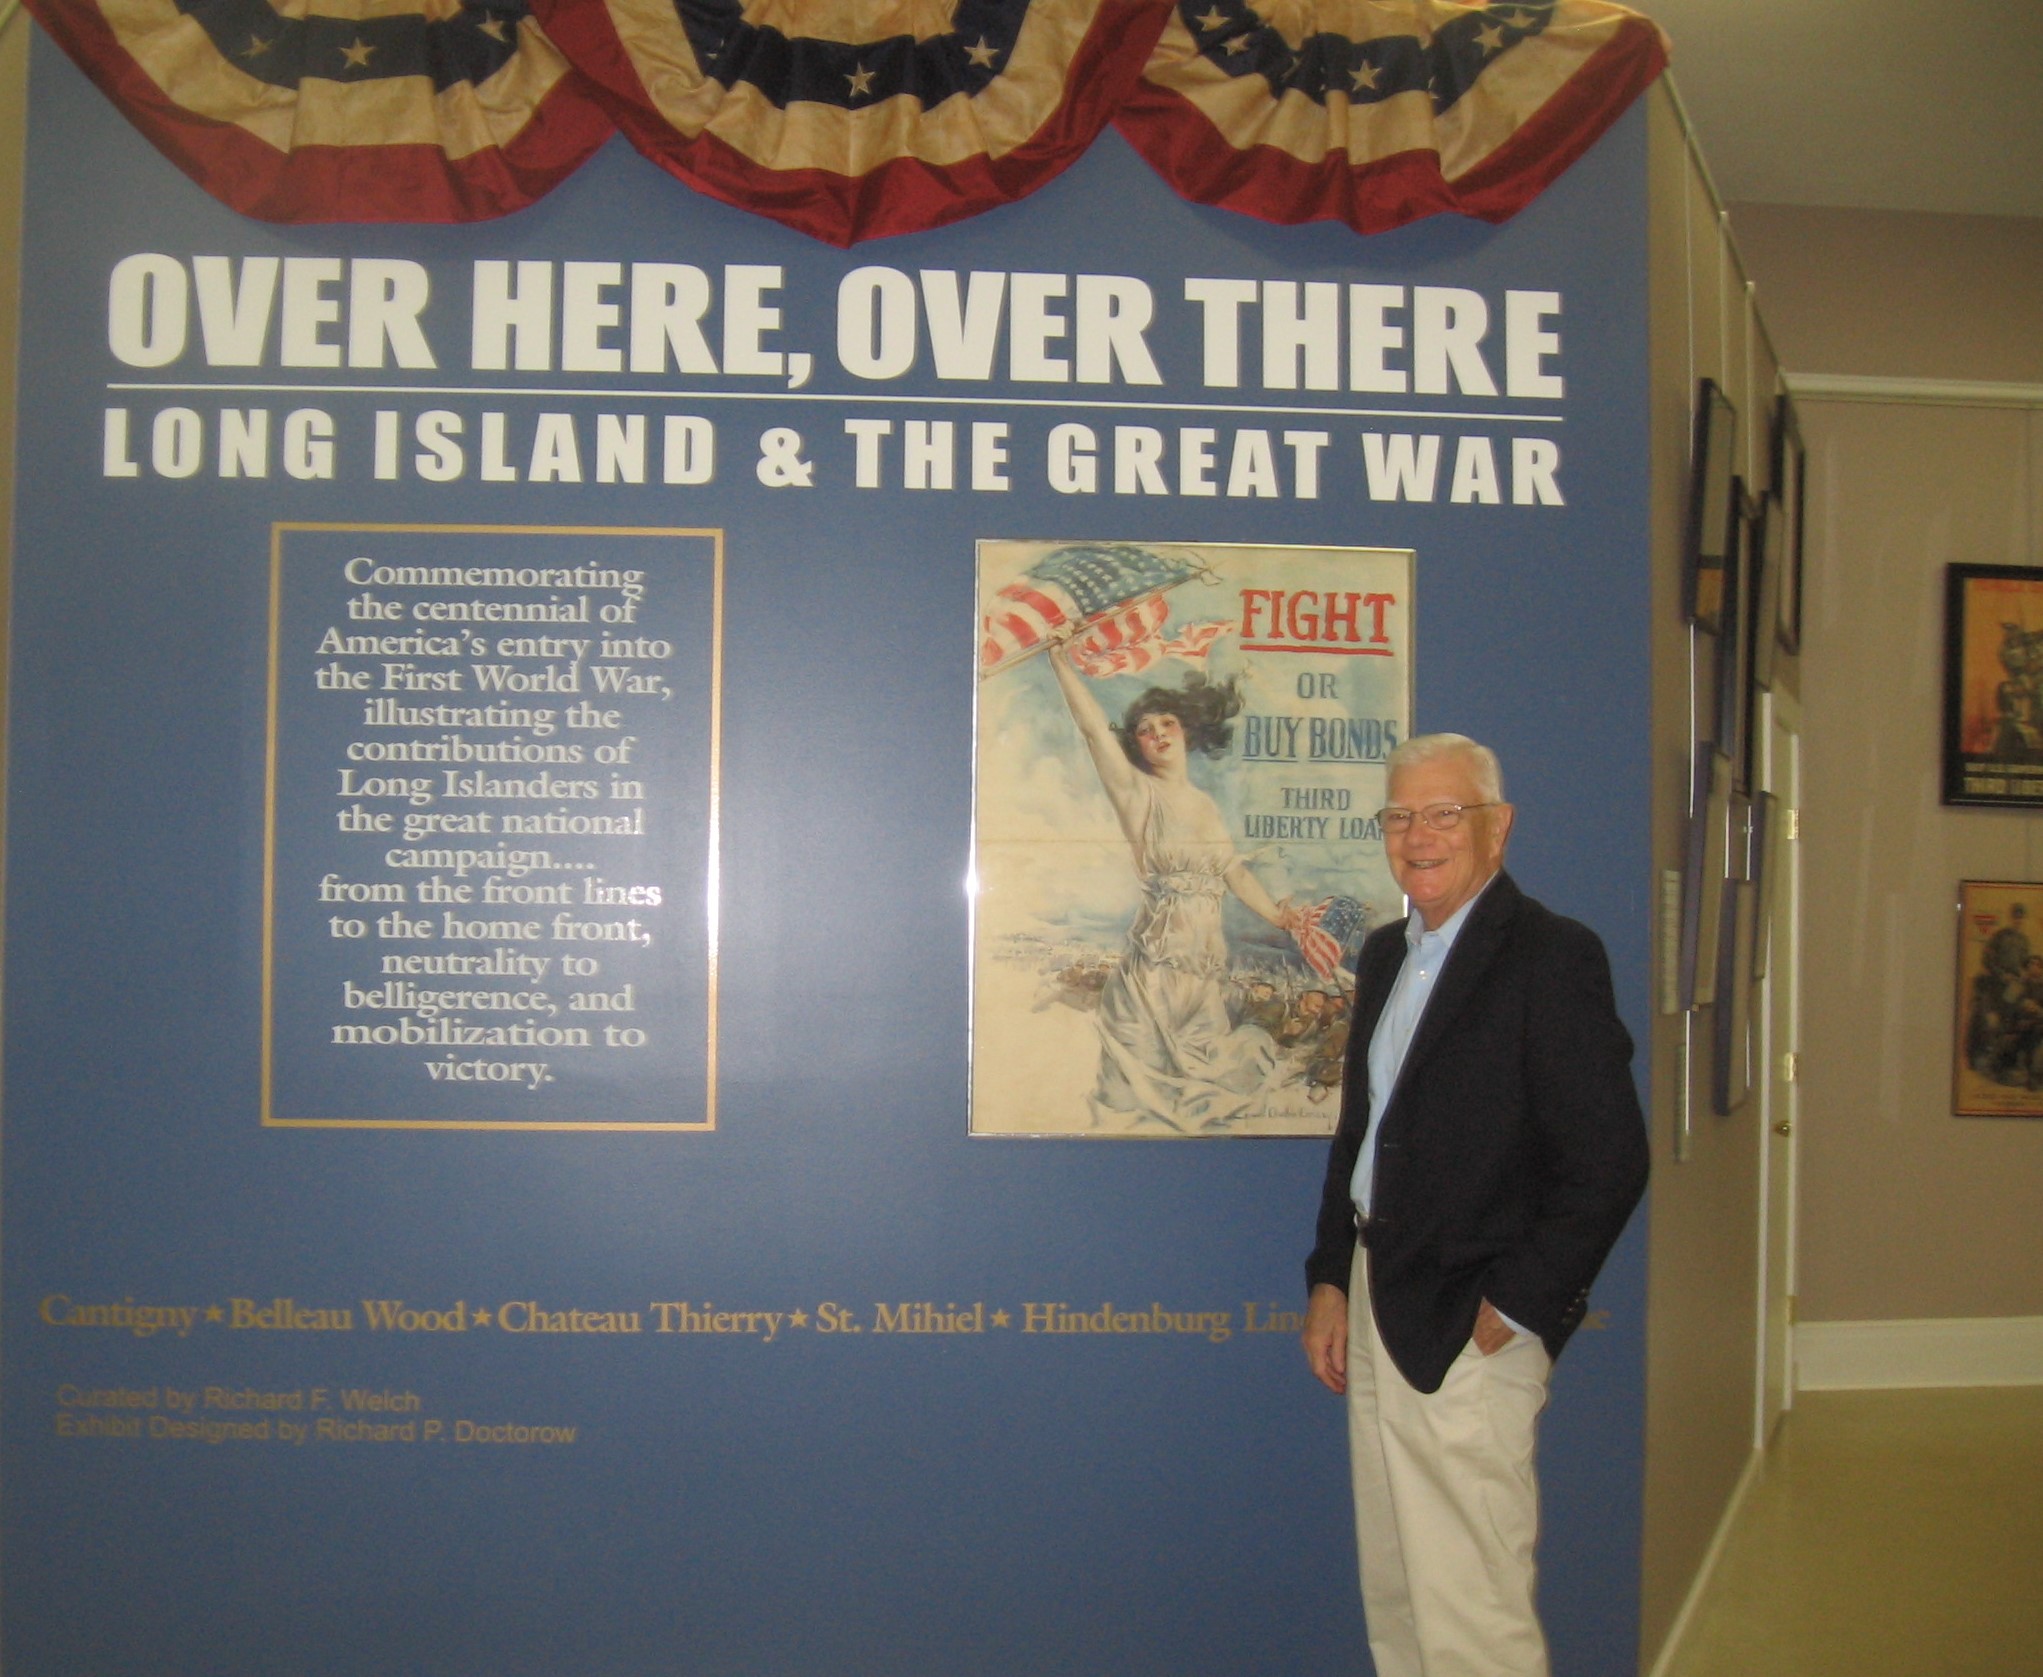 Author and historian Richard Welch will look at Great Neck and Long Island efforts to support World War I on the 100th anniversary of the end of the war. The Great Neck Historical Society program, free and open to the community, will be held on Tuesday, November 13, at 7:30 p.m. at Great Neck House. (Photo courtesy of the Great Neck Historical Society)